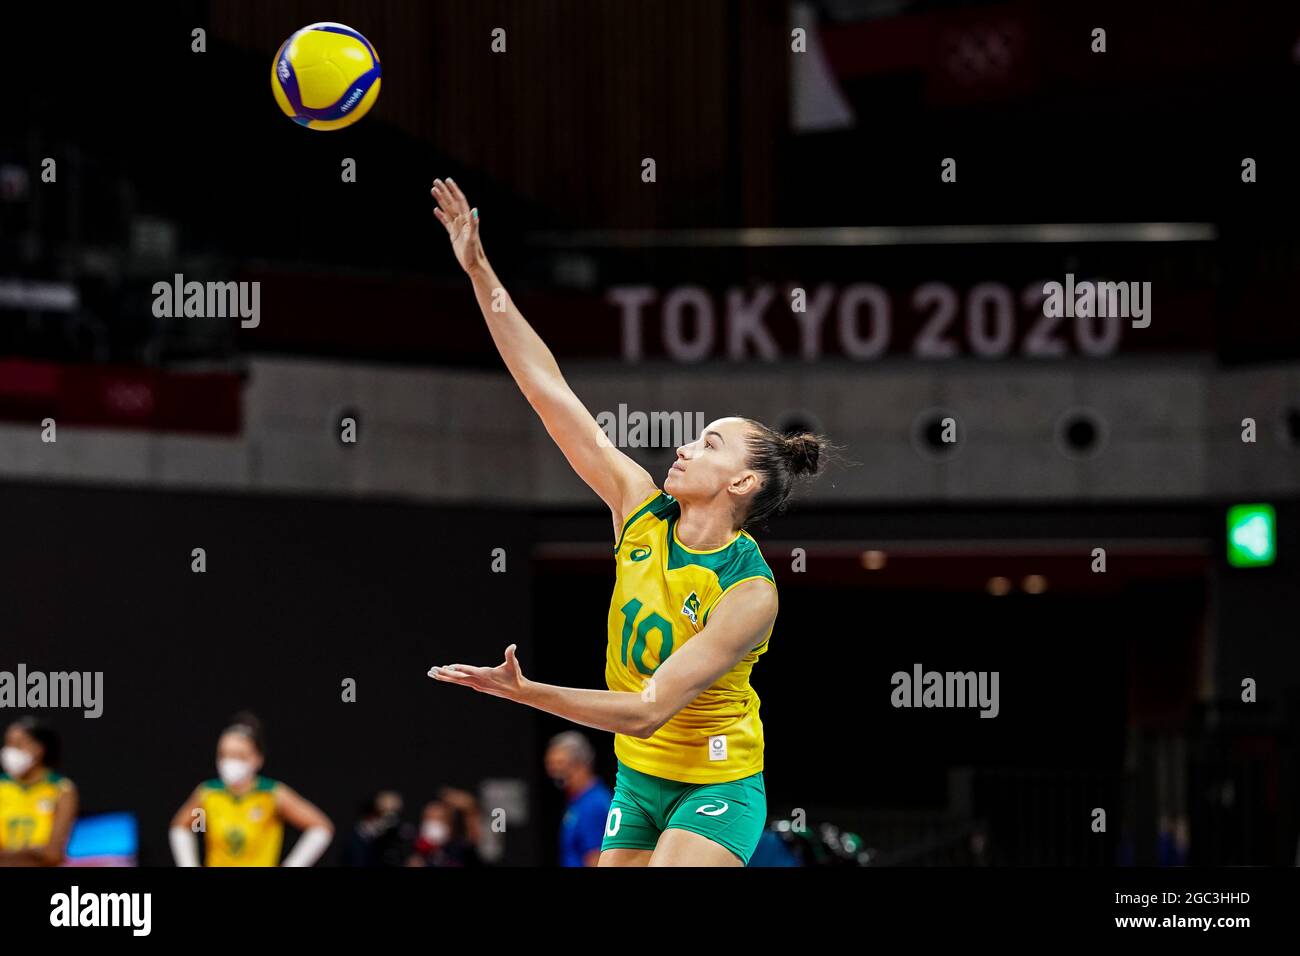 Tokyo, Japan. 06th Aug, 2021. T'QUIO, TO - 06.08.2021: TOKYO 2020 OLYMPIAD  TOKYO - Rosamaria do Brasil during the Brazil vs South Korea volleyball game  at the Tokyo 2020 Olympic Games held